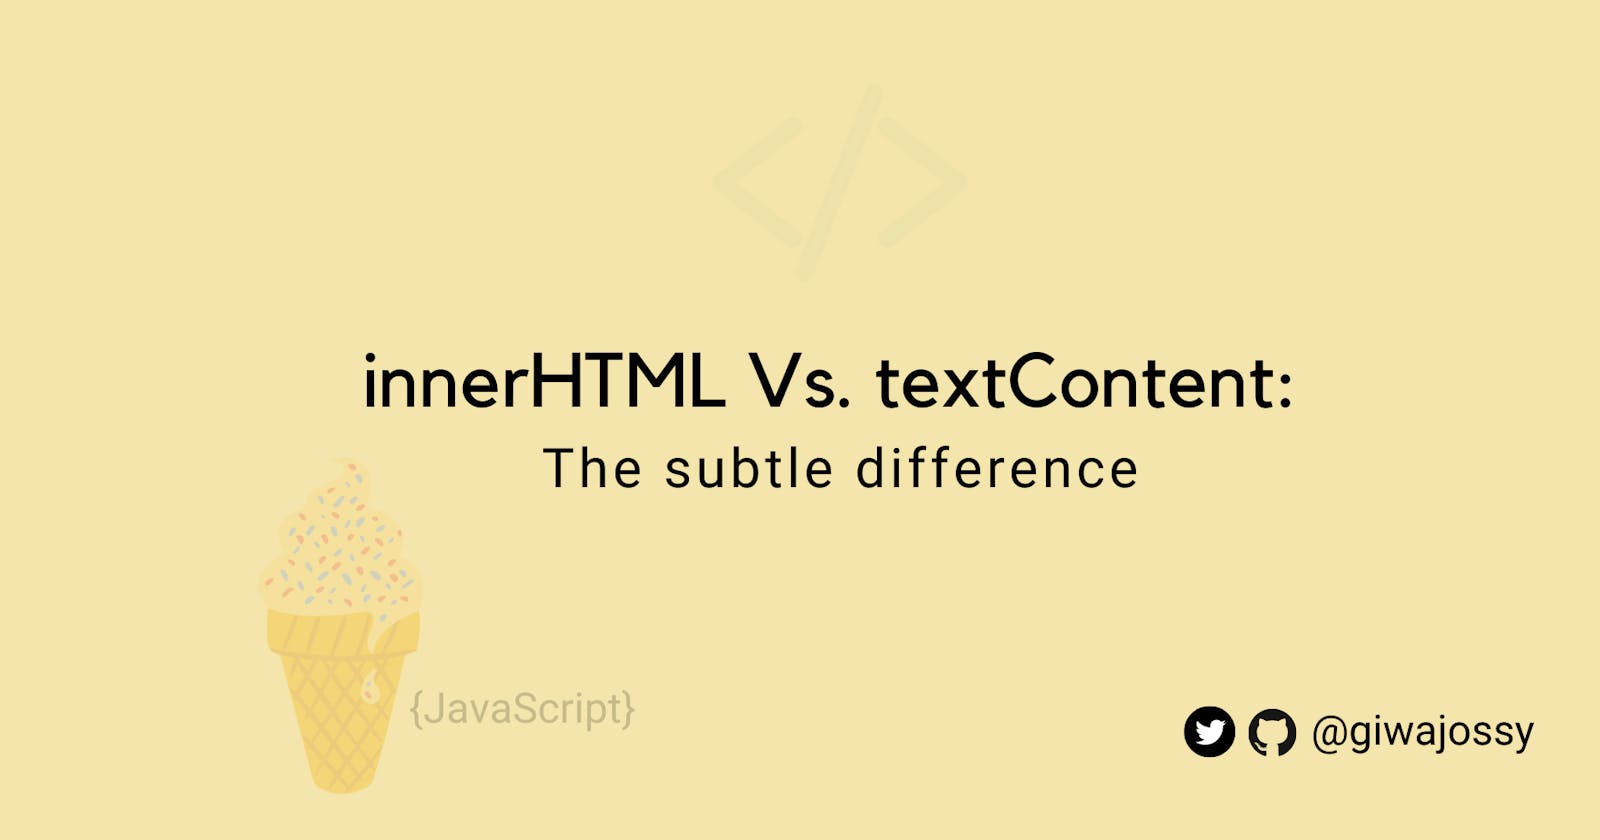 innerHTML Vs. textContent: The subtle difference.